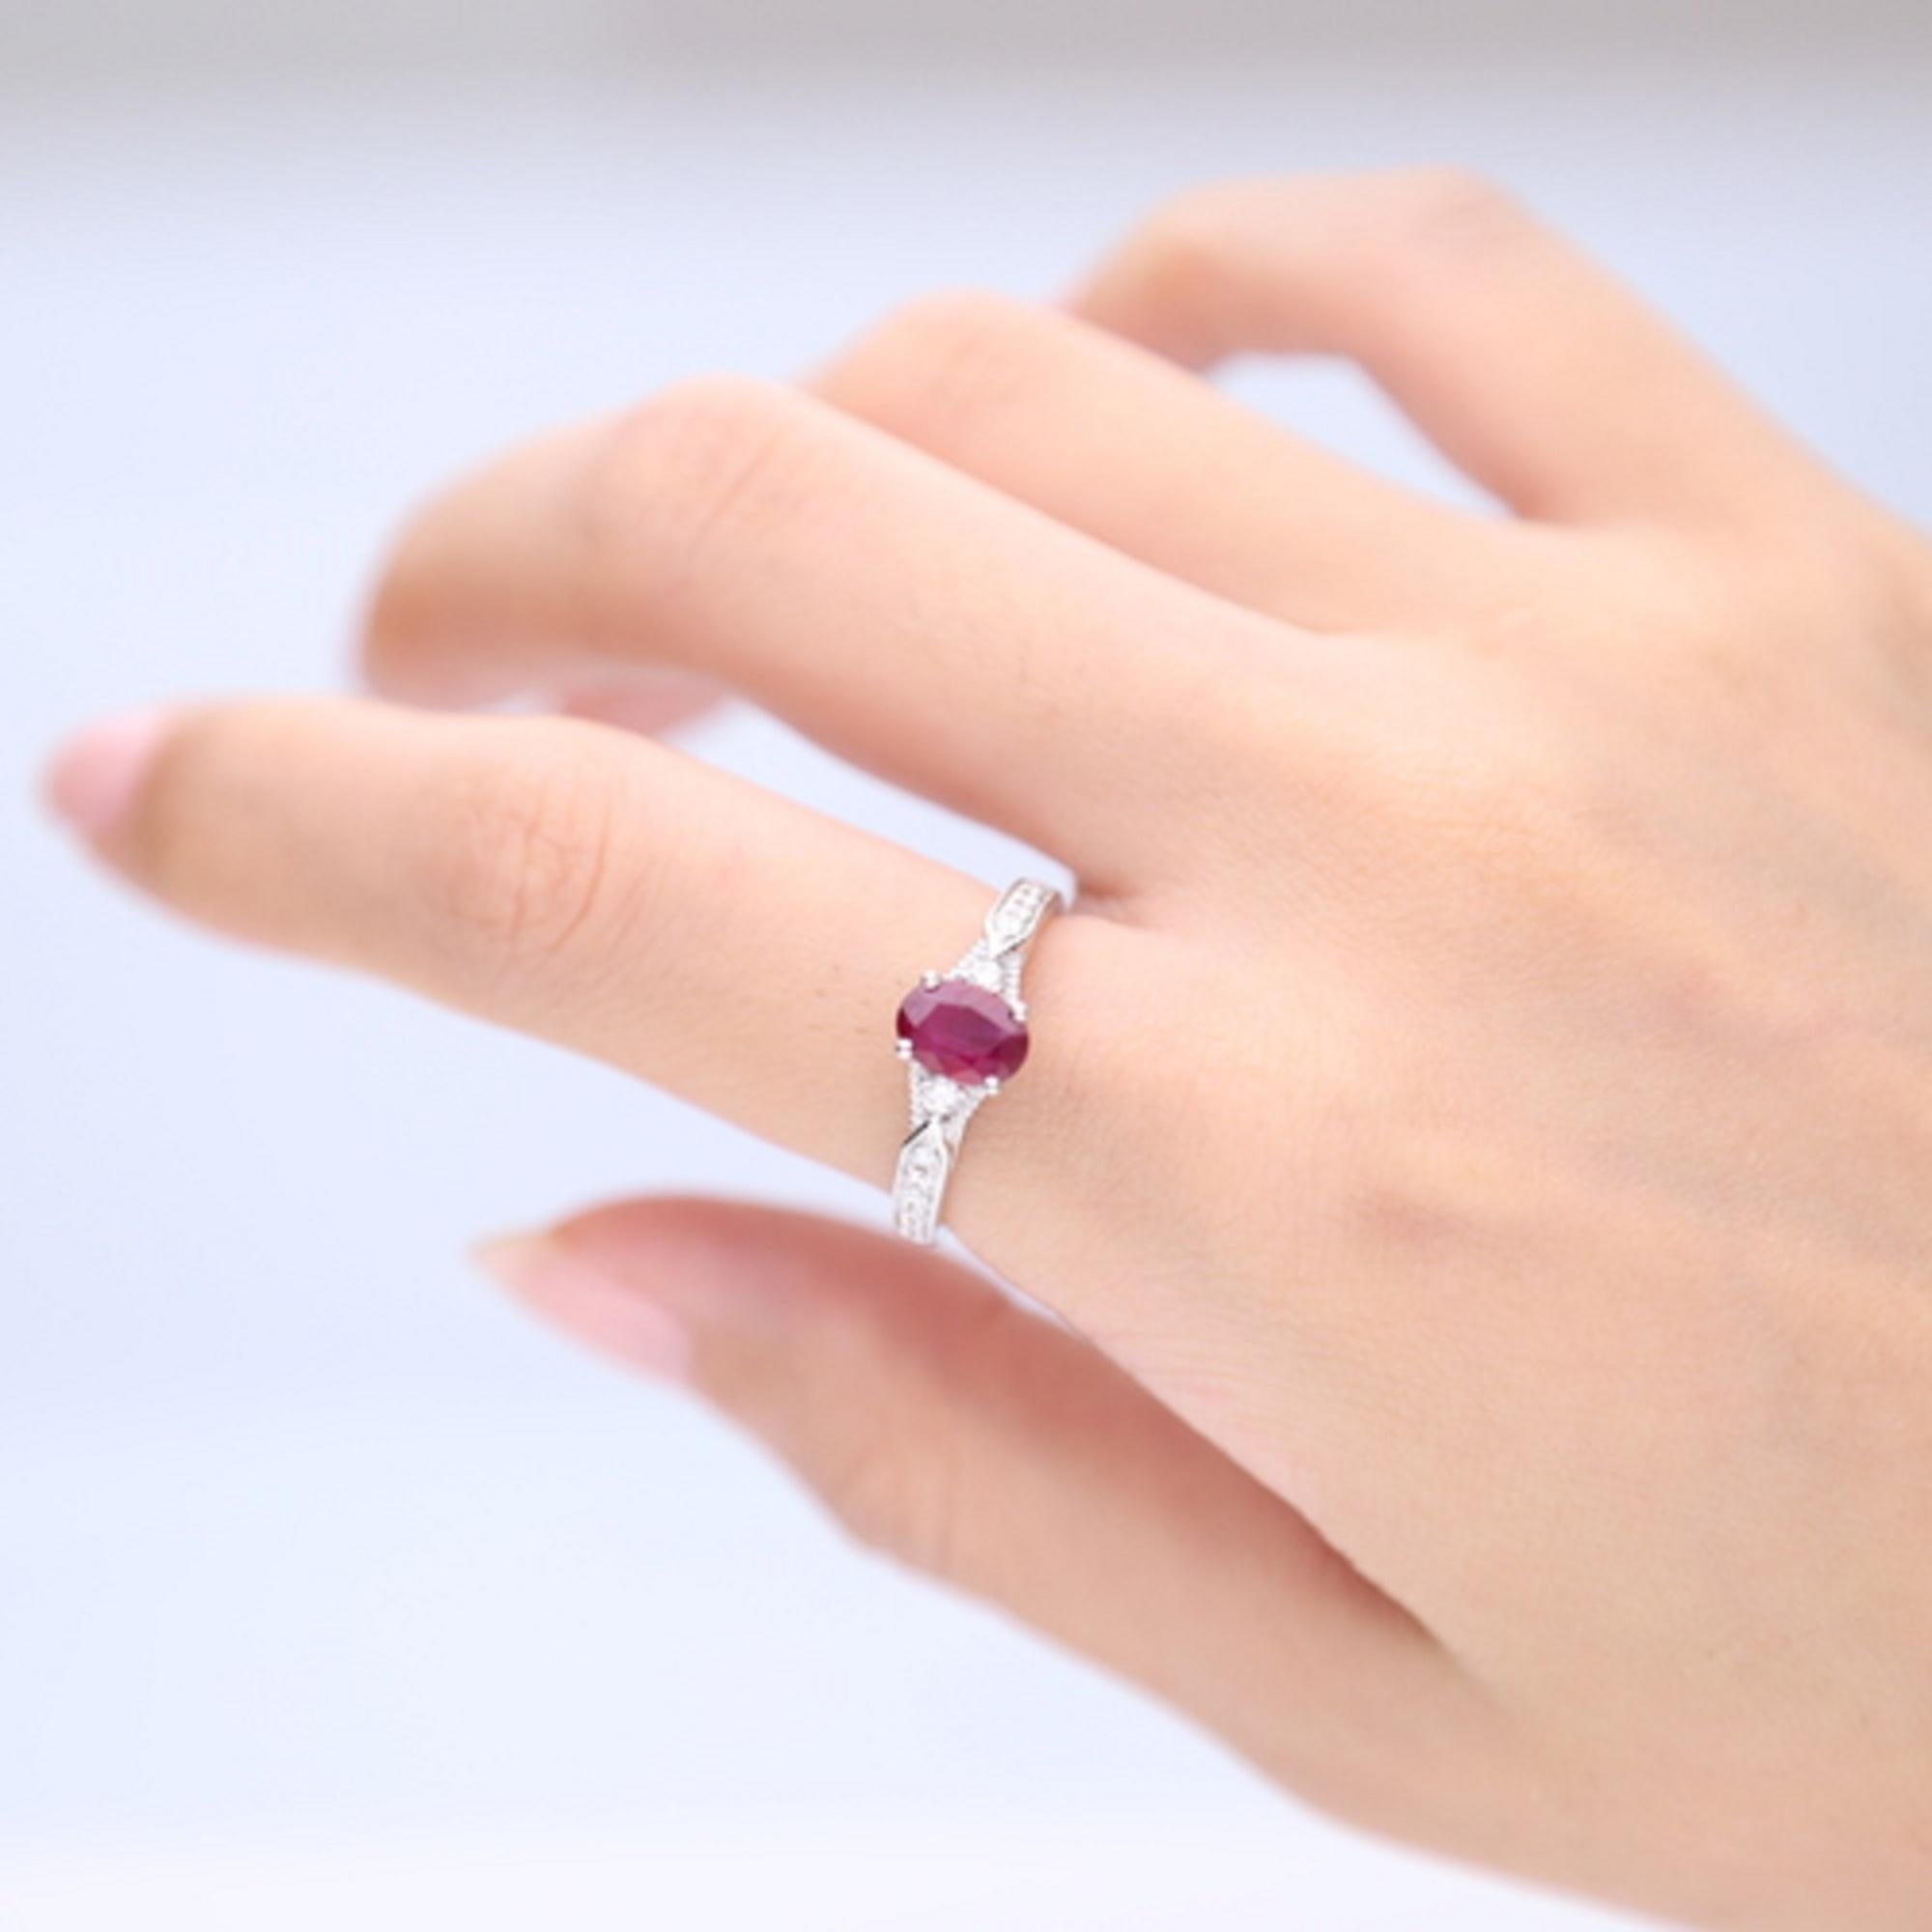 Stunning, timeless and classy eternity Unique Ring. Decorate yourself in luxury with this Gin & Grace Ring. The 14k White Gold jewelry boasts Oval cut Prong Setting Natural Ruby (1 pcs) 0.90 Carat, along with Natural Round cut white Diamond (14 Pcs)